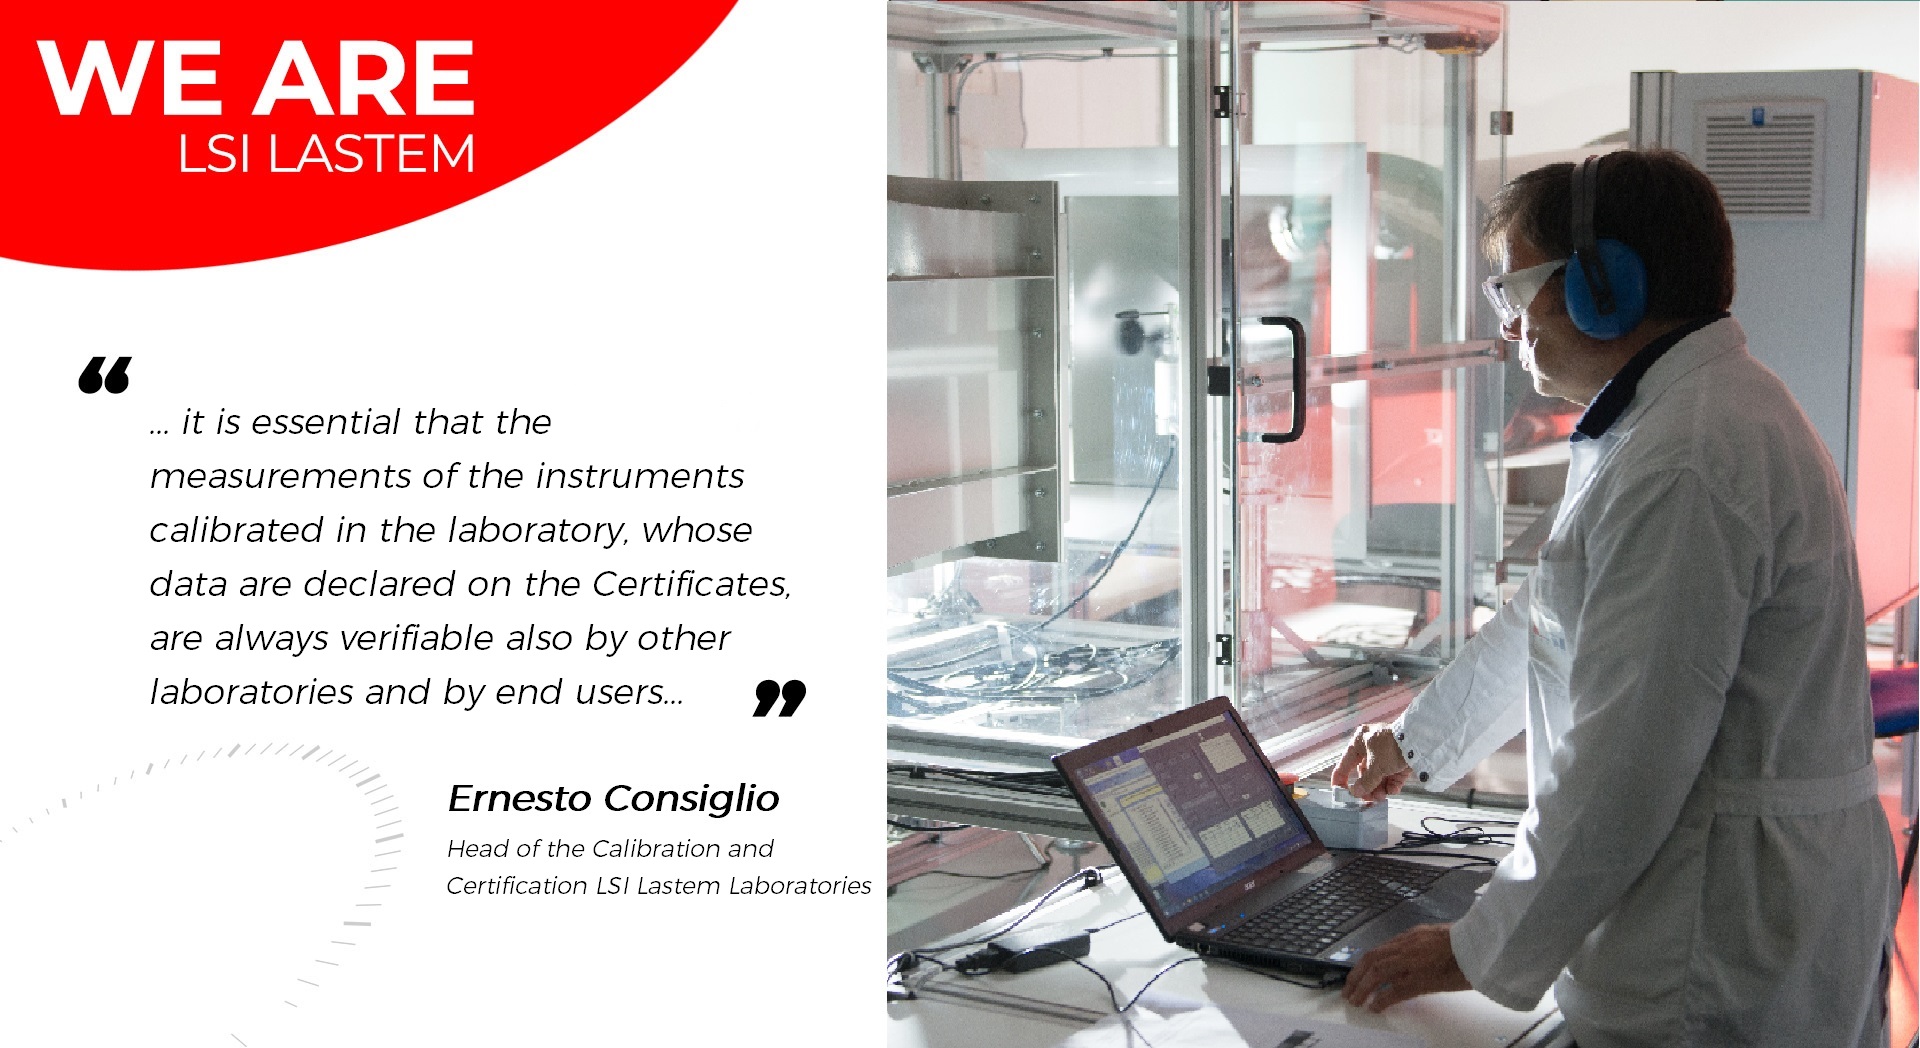 A little chat with Ernesto Consiglio, the Head of the Calibration and Certification Laboratories